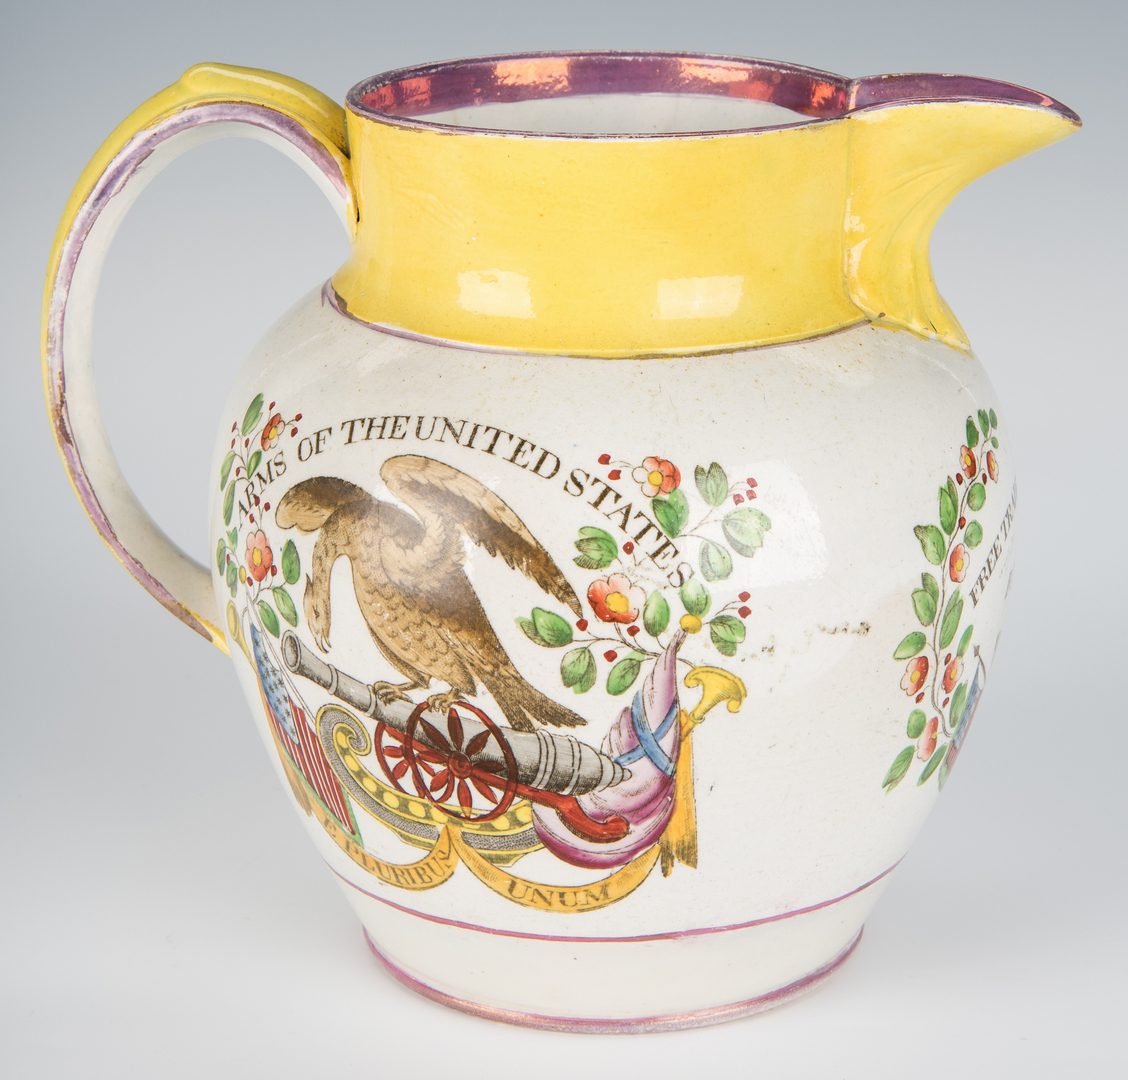 Lot 240: American Polychrome Historical Staffordshire Jug, Arms of the US